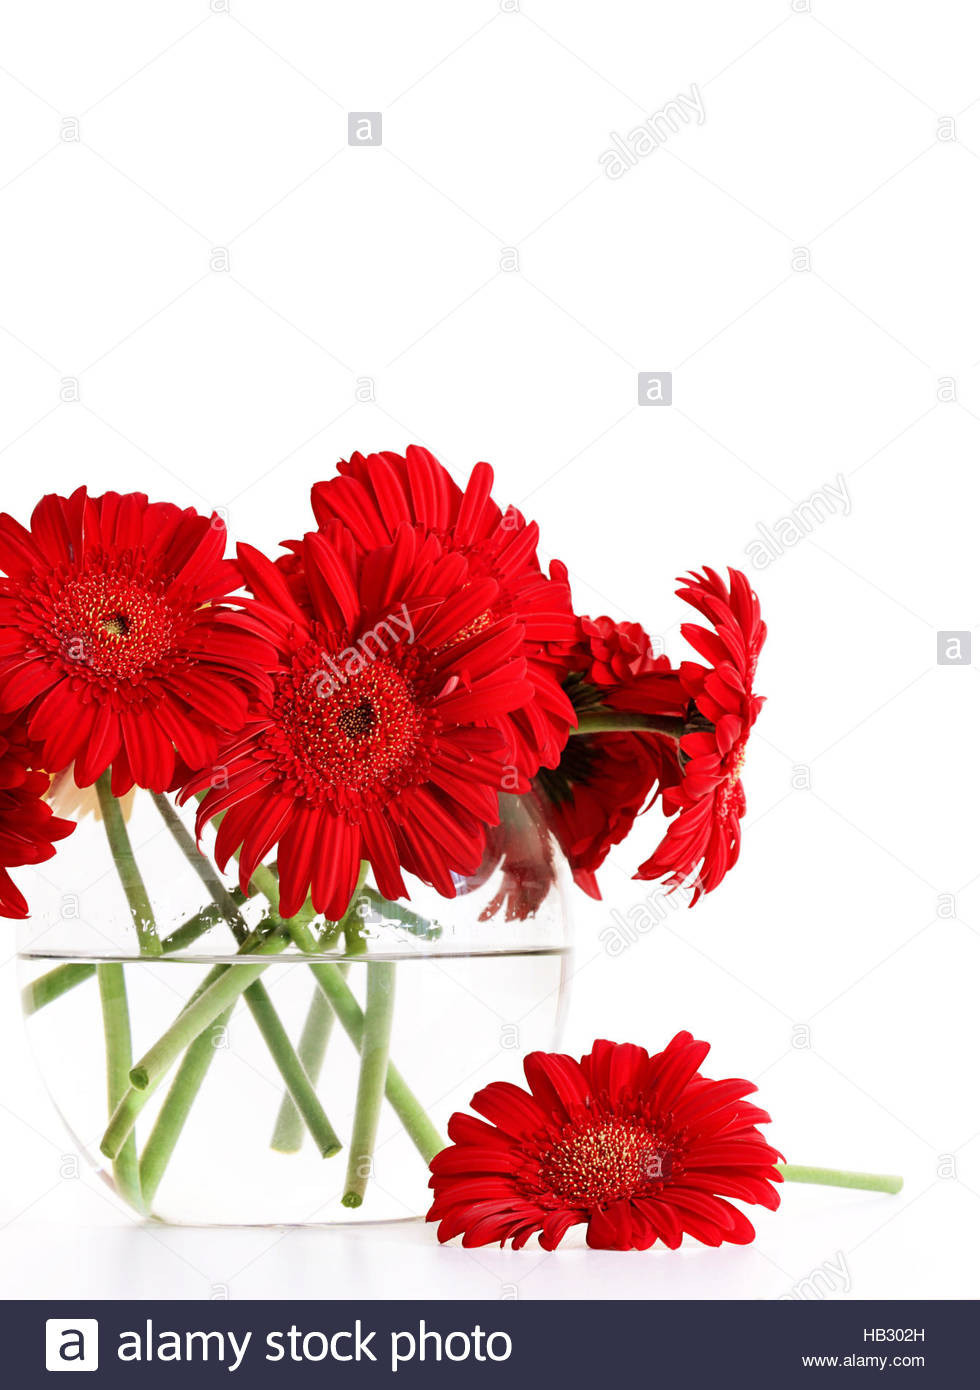 19 Fabulous Red Glass Gems for Vases 2024 free download red glass gems for vases of red glass vase photos single red glass vase isolated stock s pertaining to red glass vase pics closeup od red gerber daisies in glass vase stock of red glass